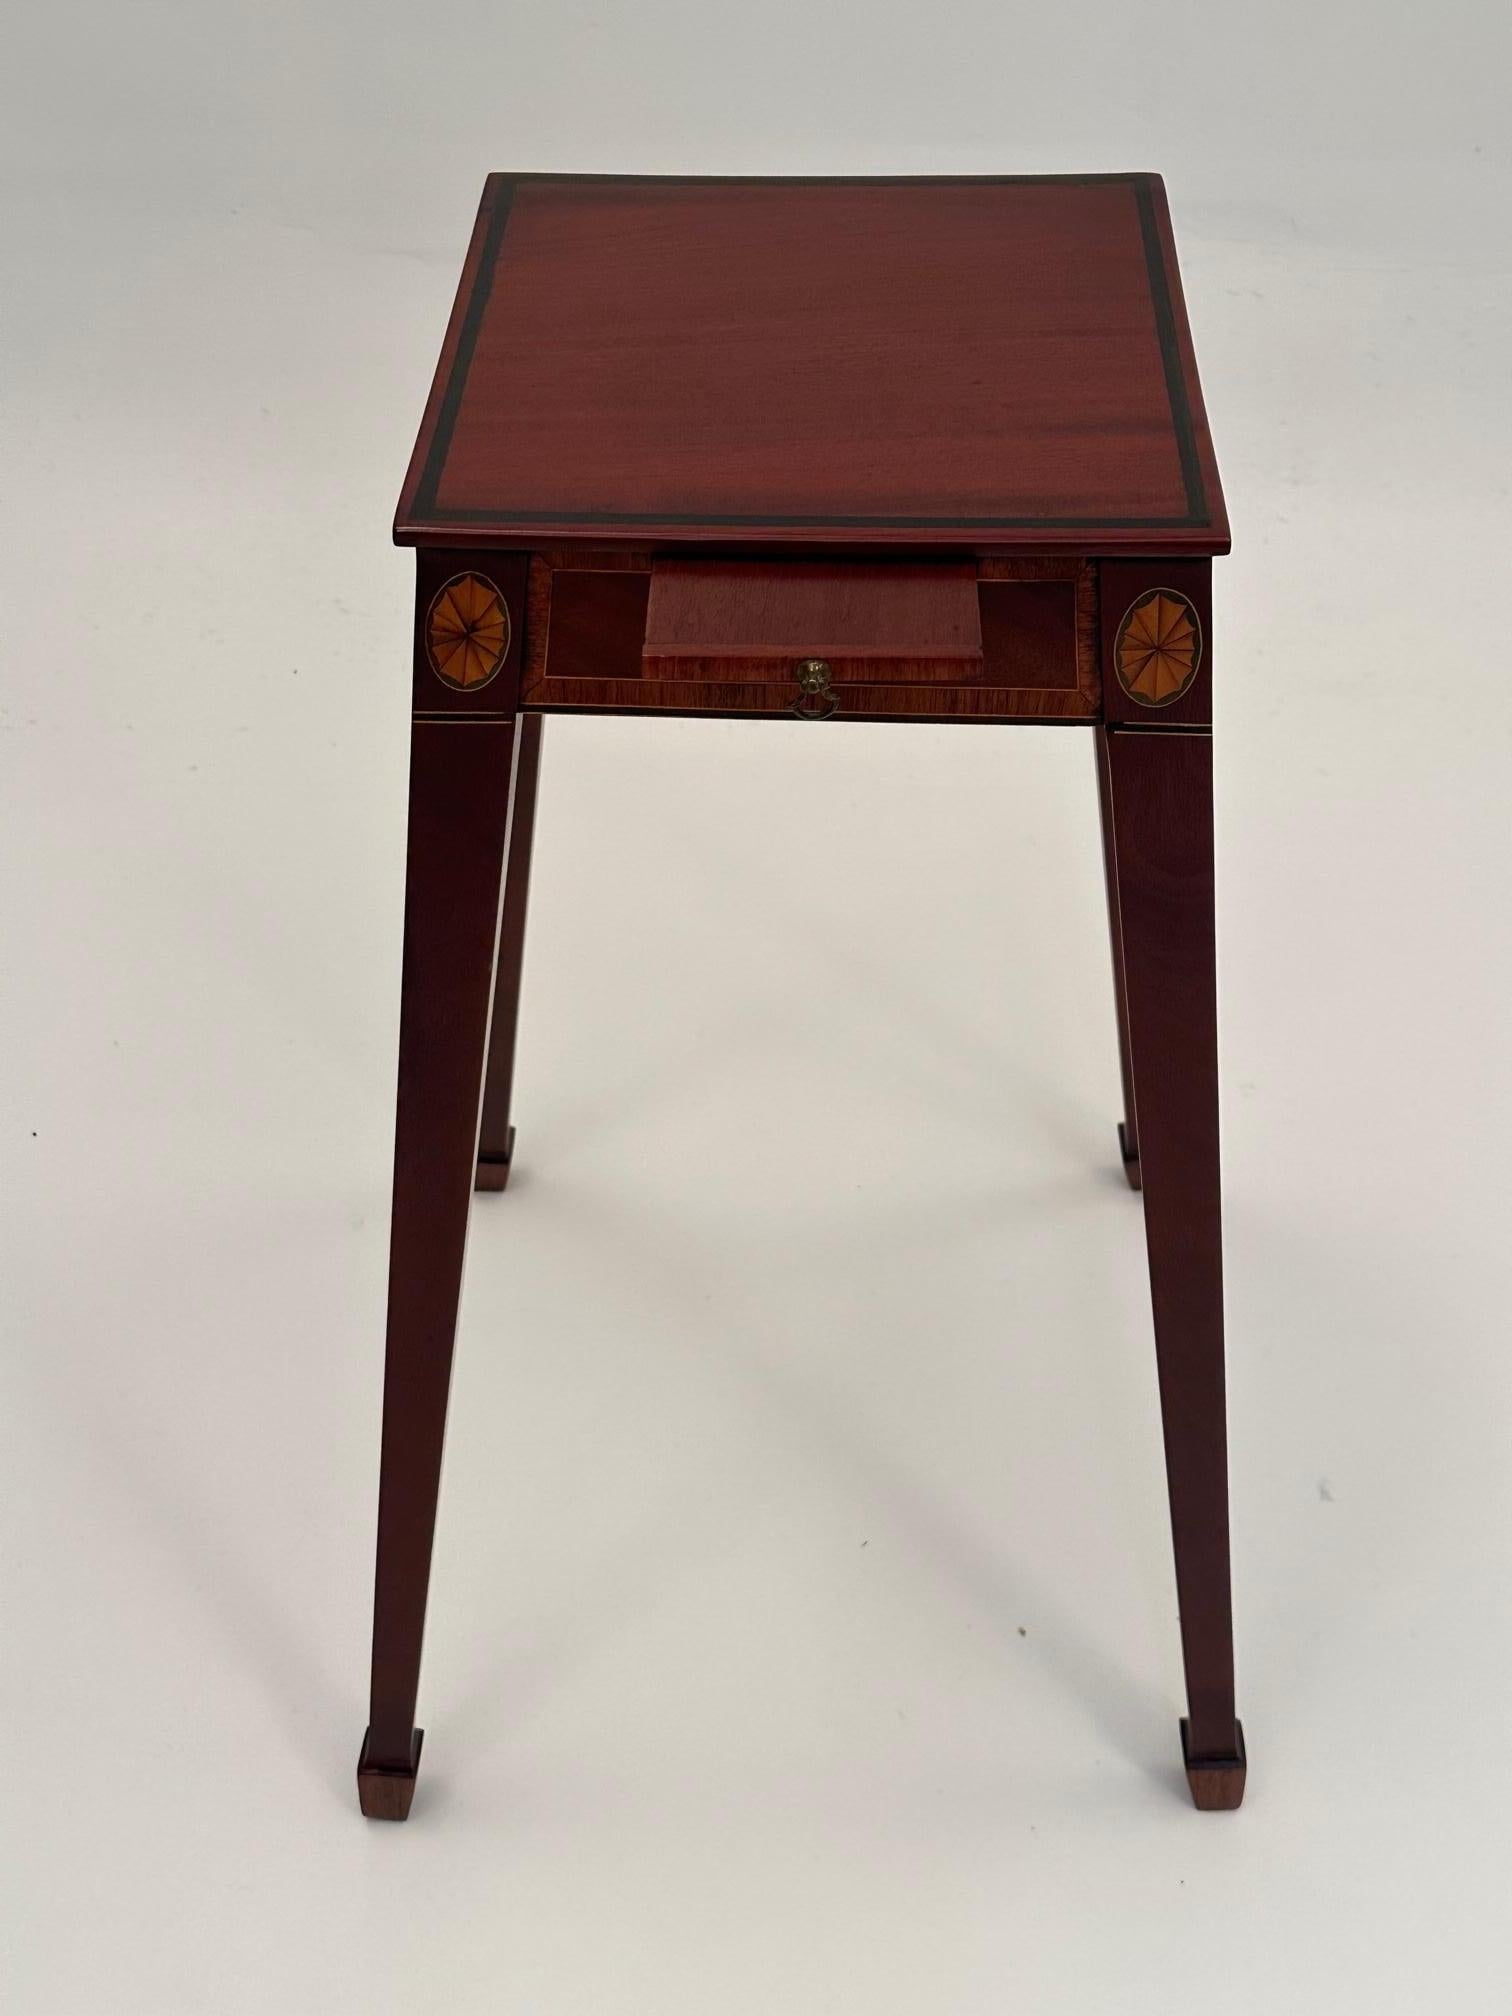 Lovely antique mahogany stand or delicate end table having splayed legs, satinwood inlay on the 11 x 11 top, and single candle slide.